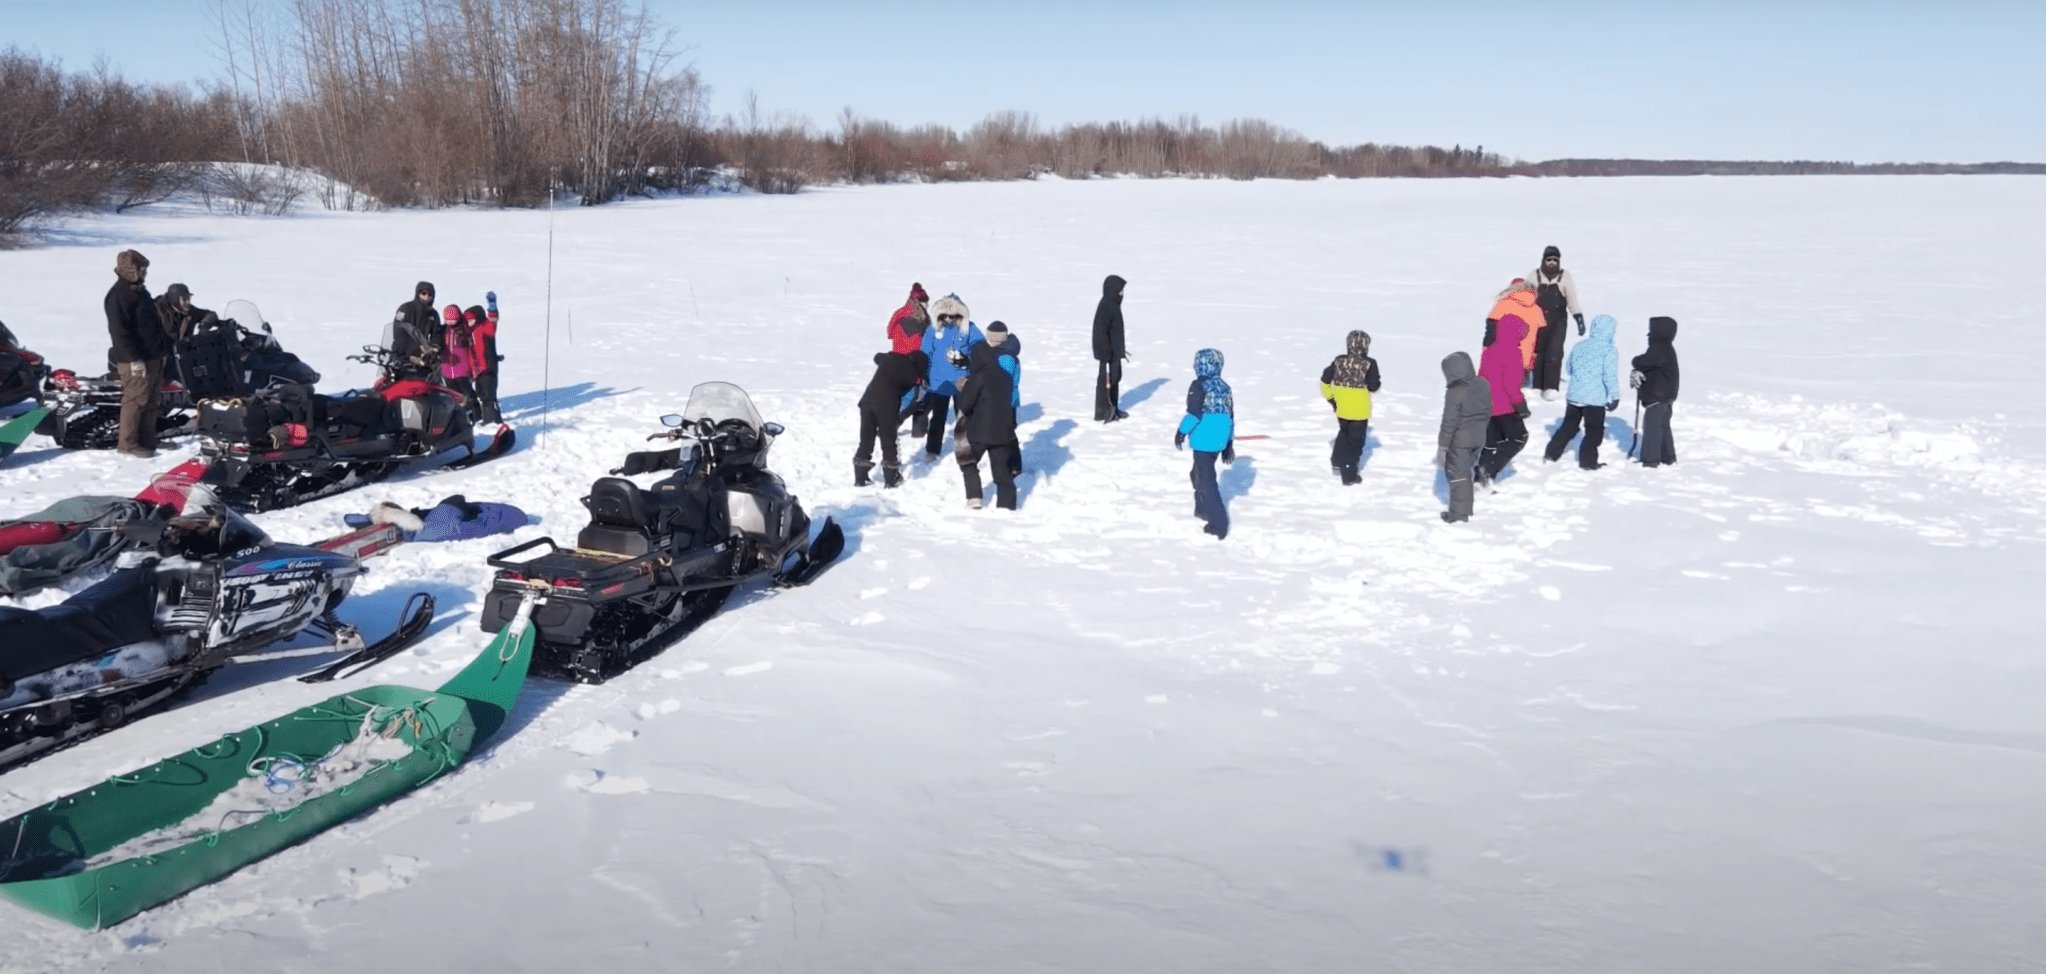 Photograph of about 20 people in colorful jackets gathered on lake ice. Snowmobiles, backpacks and other equipment are nearby.